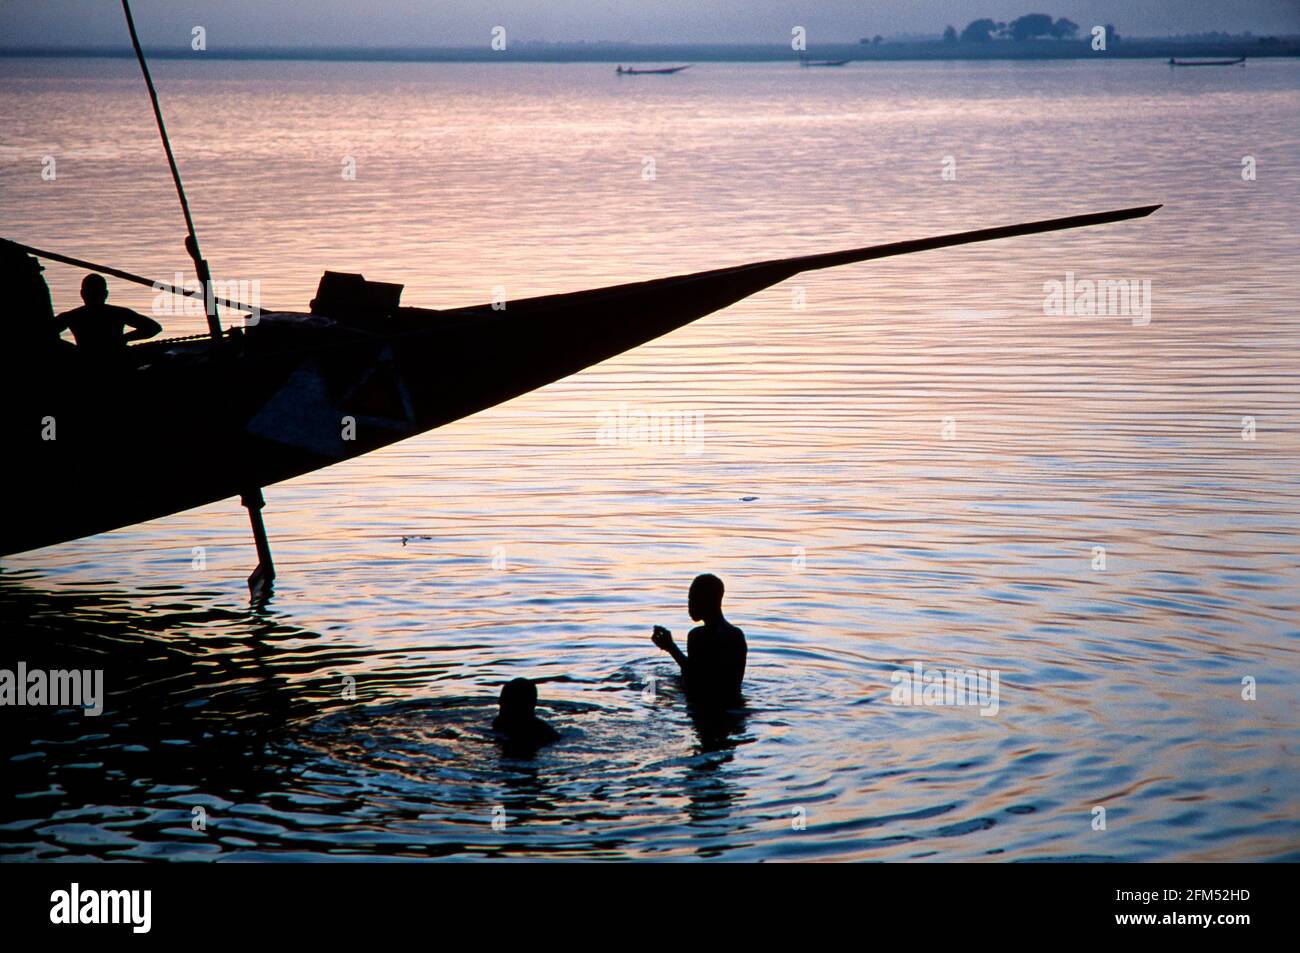 Evening bath in Mopti in the river Bani in front of a pirogue. 10.11.2002 - Christoph Keller Stock Photo